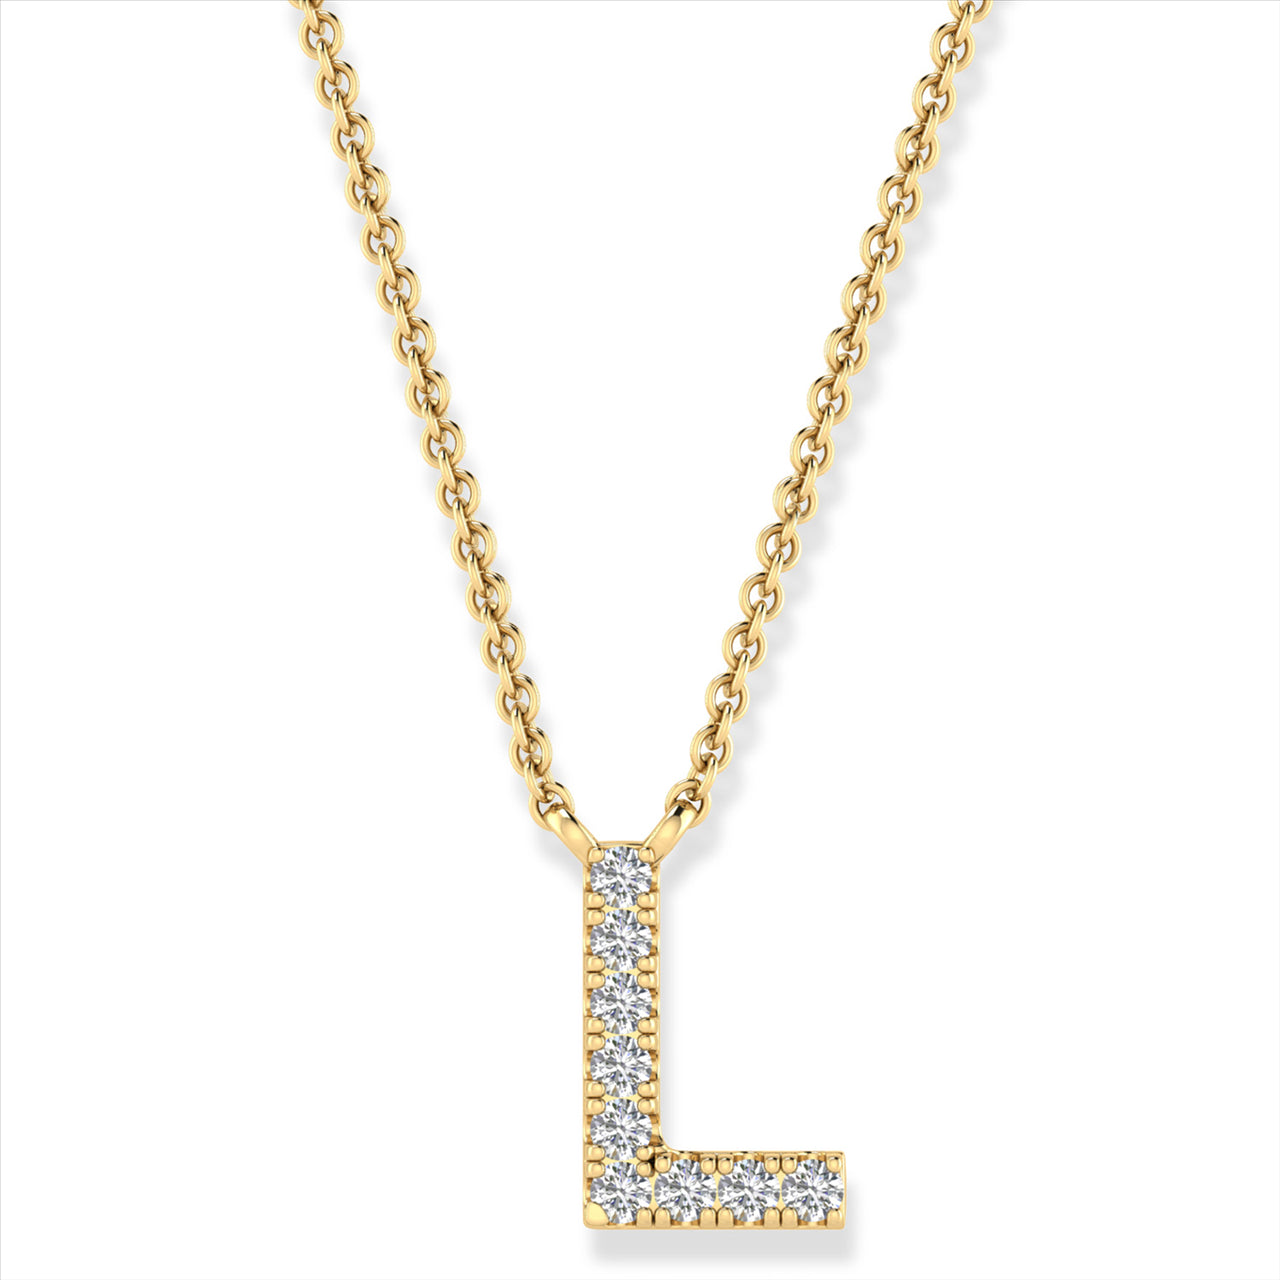 Diamond Set "L" Initial Necklace in 9 carat Yellow Gold